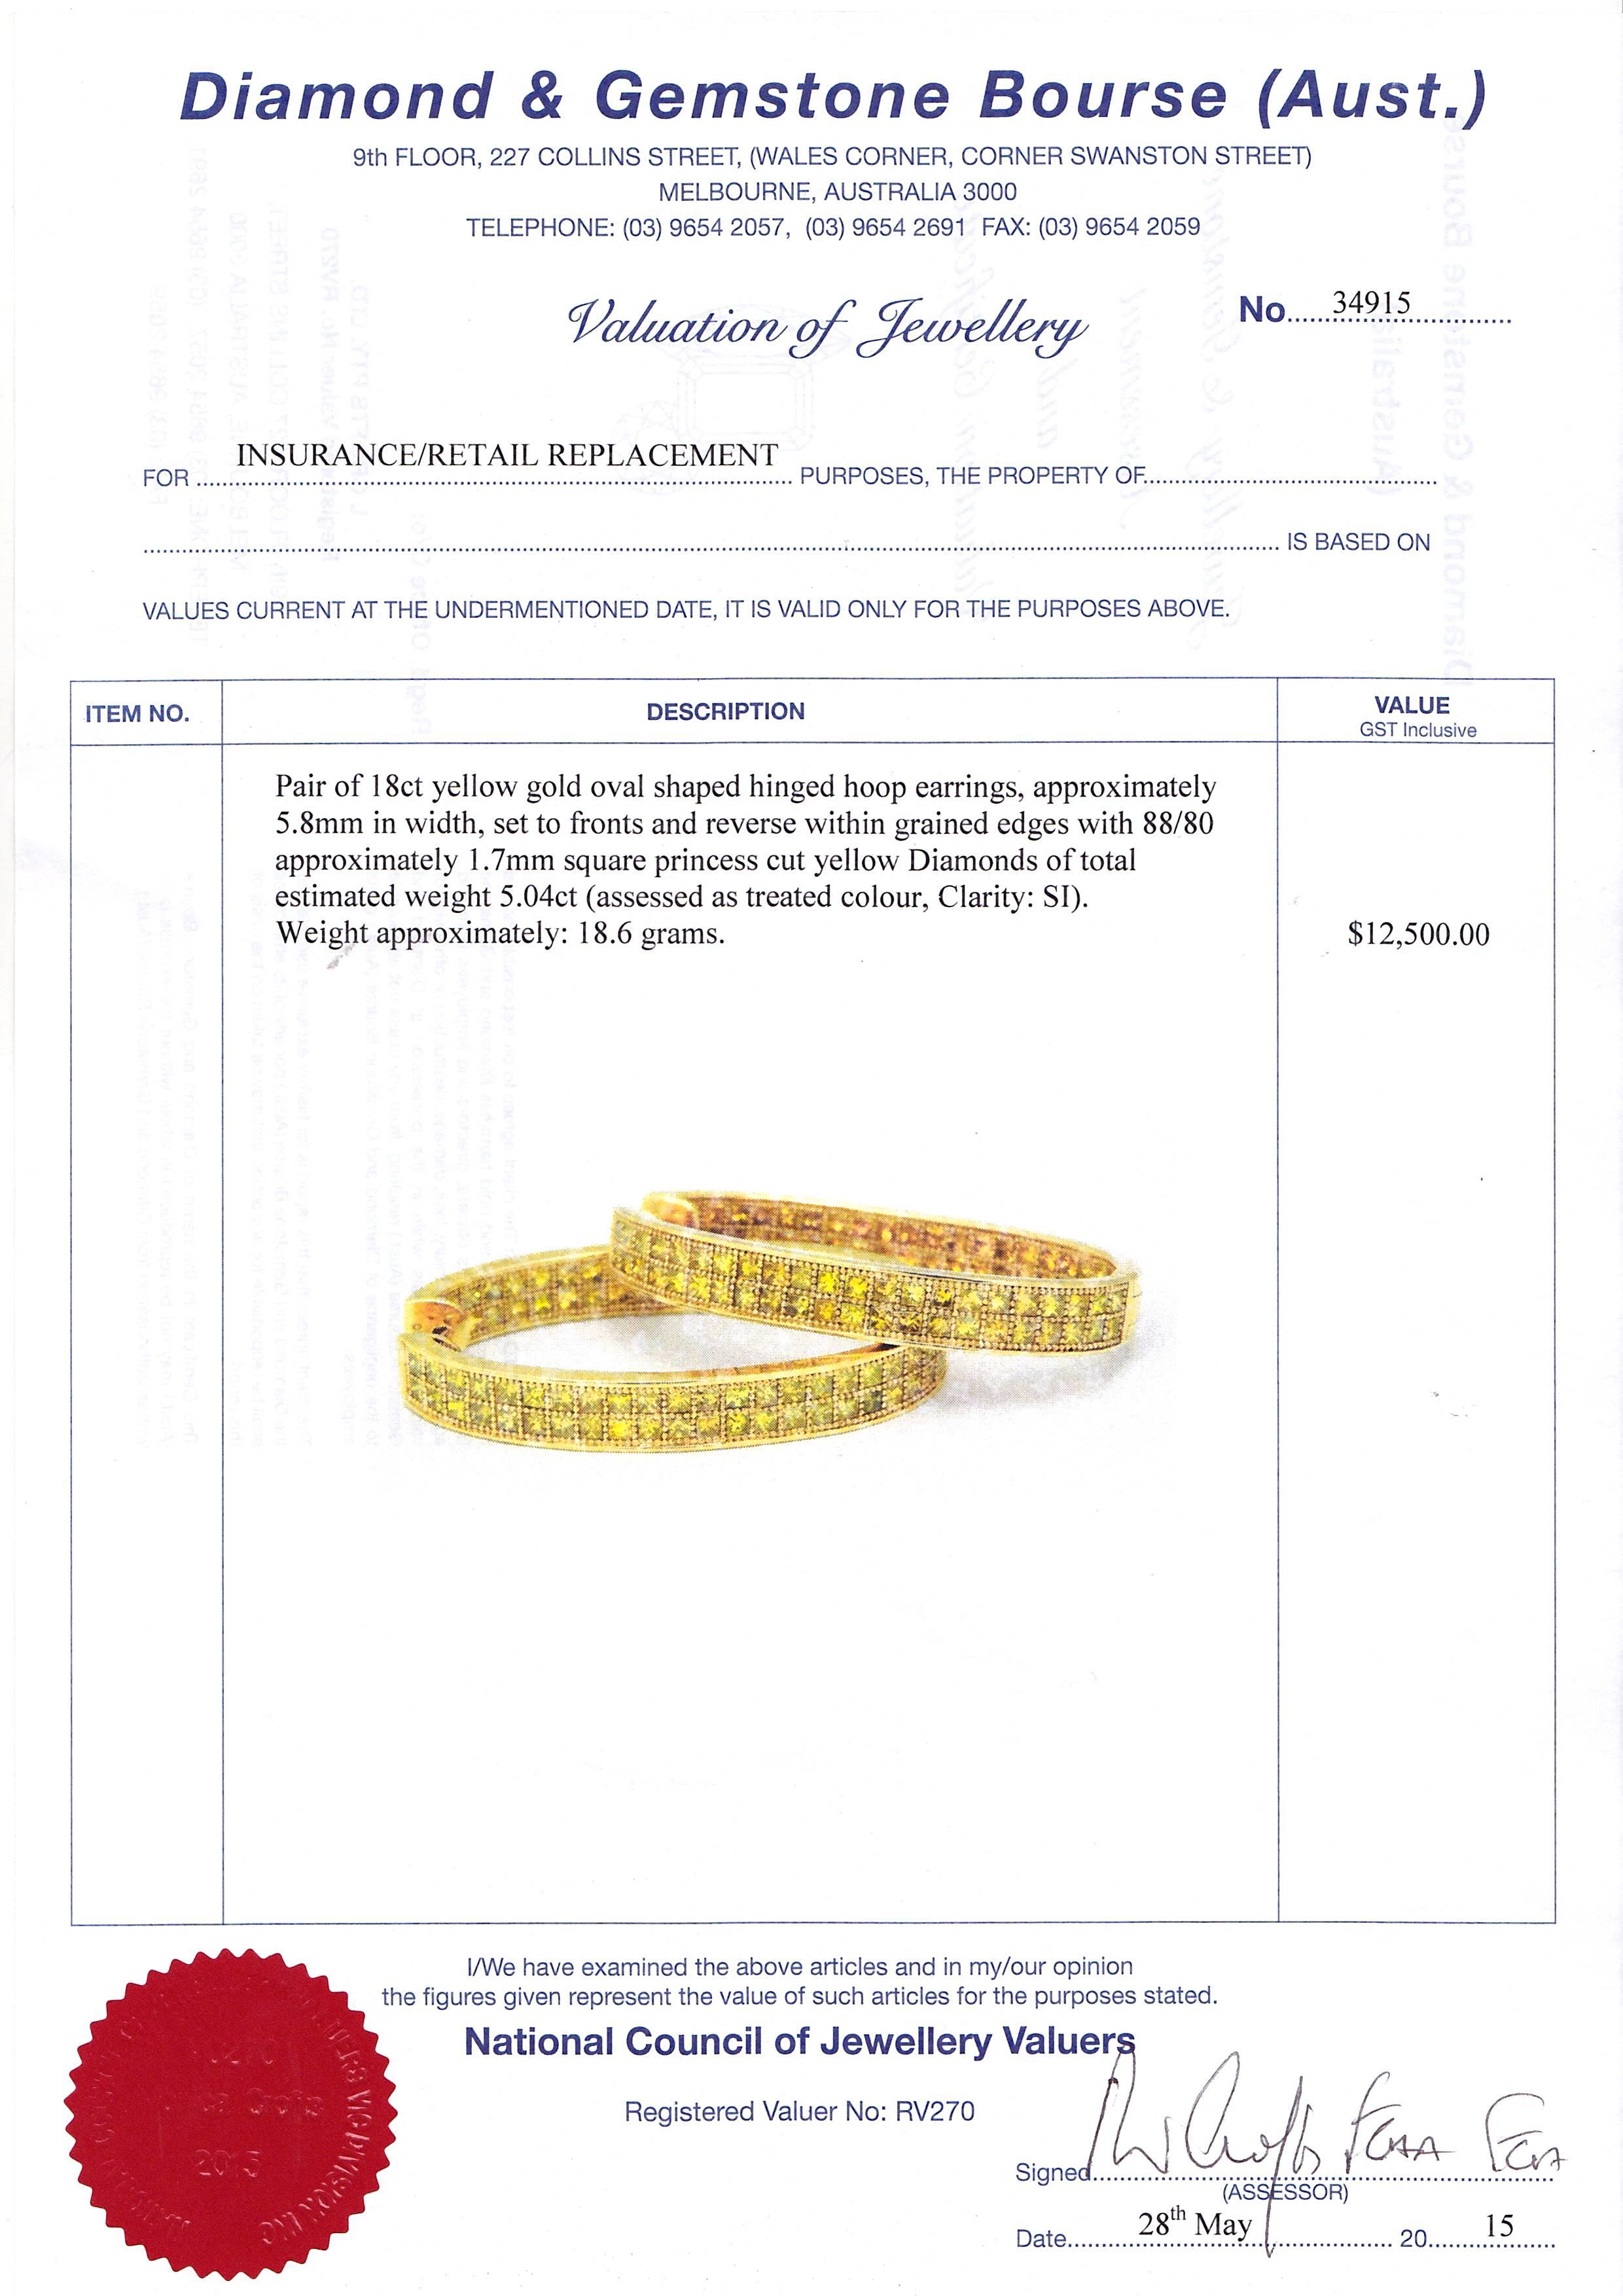 Diamond Hoop Earrings Set in 18 Carat Yellow Gold In Good Condition For Sale In Malvern, Victoria